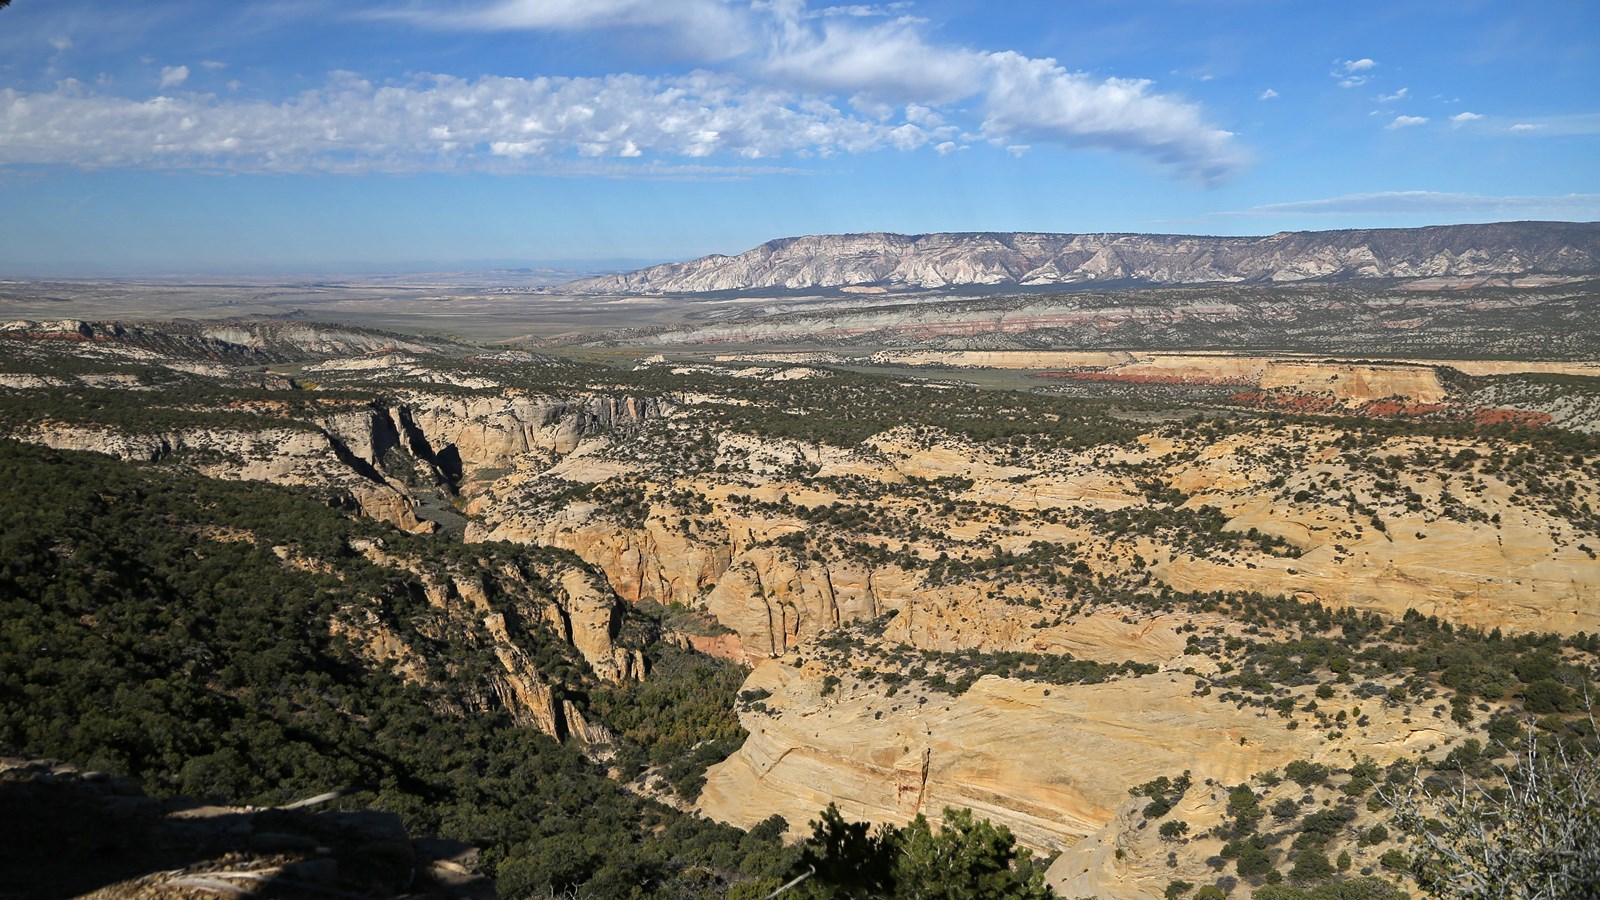 The western view from Plug Hat Butte overlooking canyons.